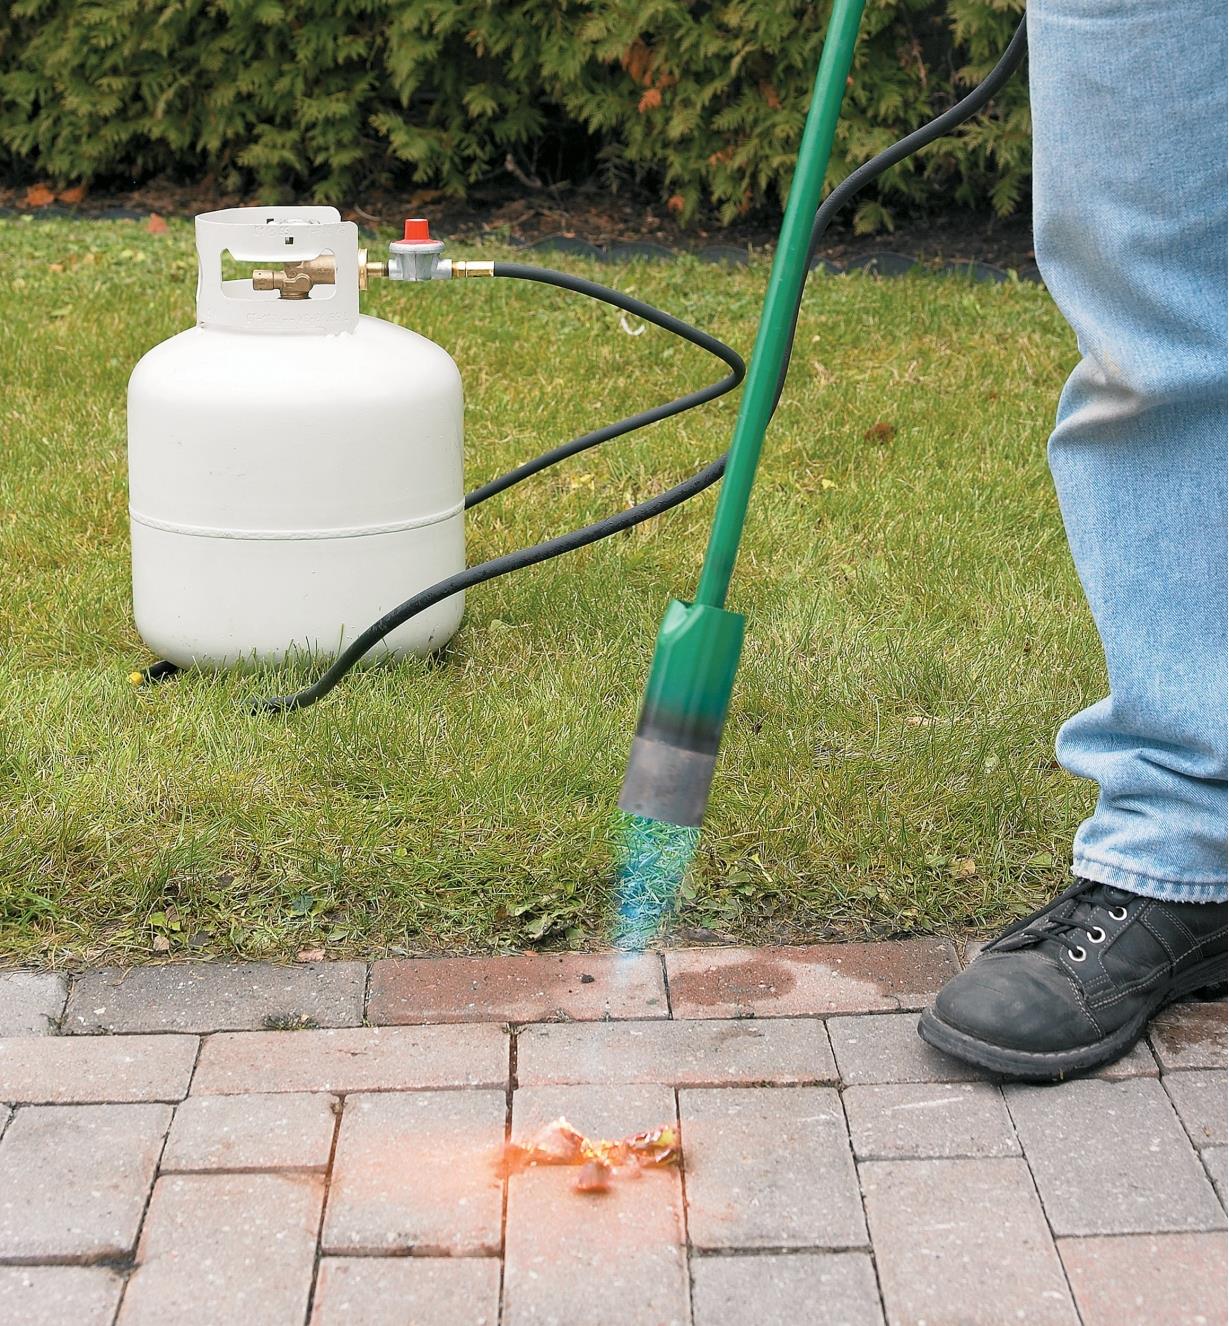 Using a Giant Weed Torch to remove weeds from between patio stones